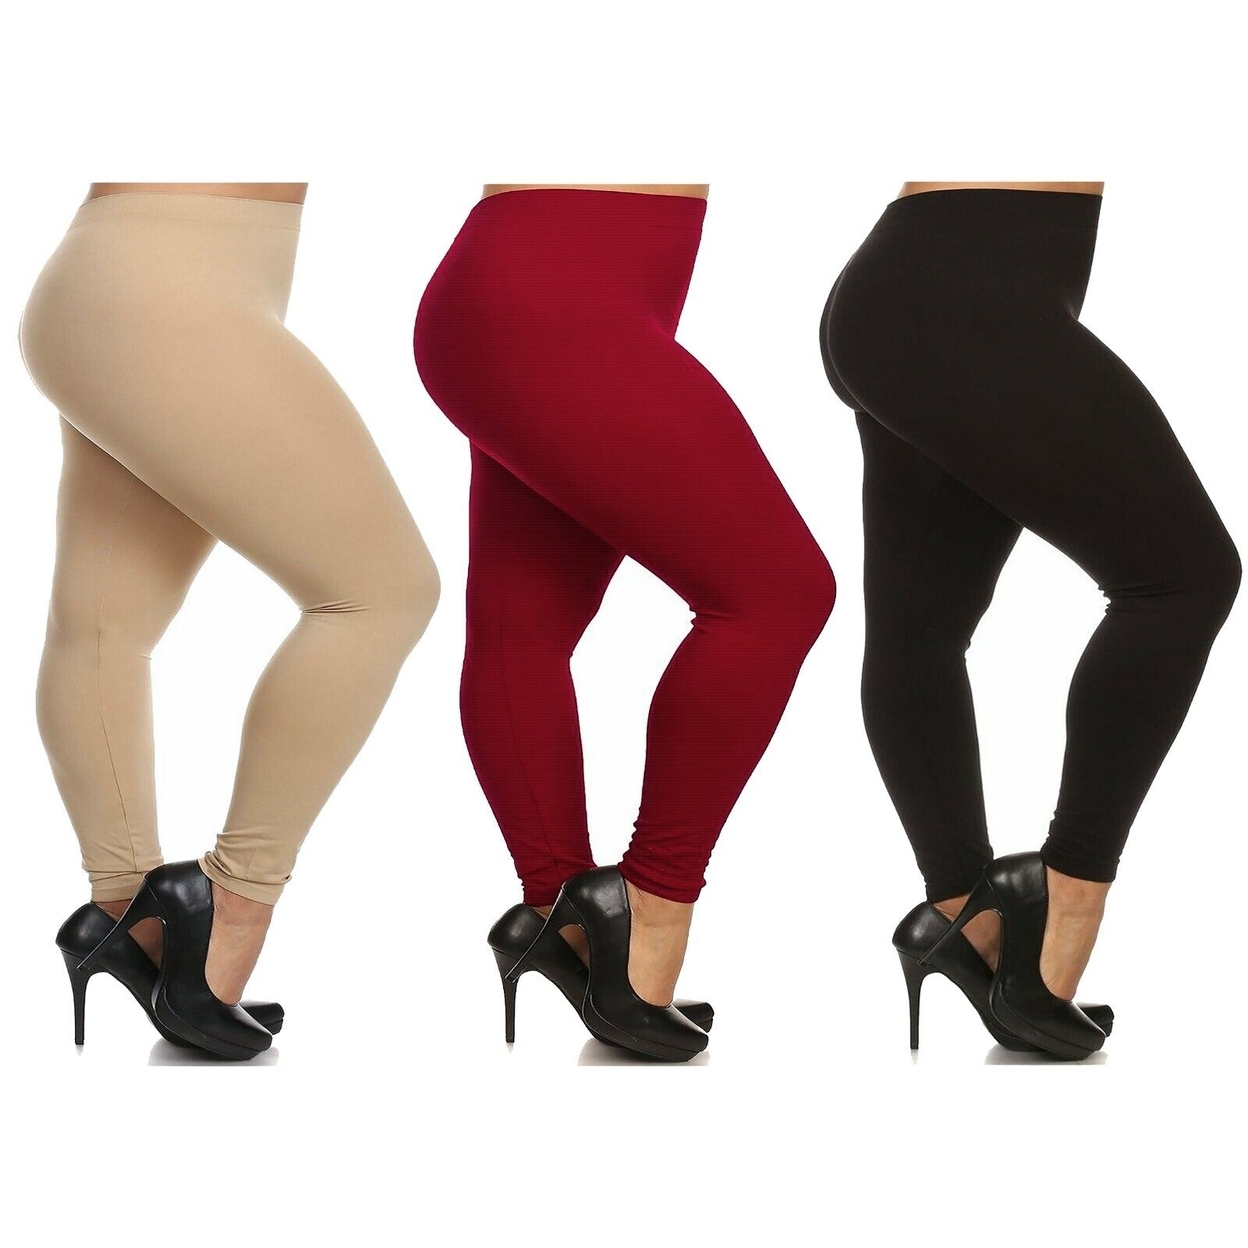 3-Pack: Women's Casual Ultra-Soft Smooth High Waisted Athletic Active Yoga Leggings Plus Size Available - Beige,black, Red, 2x